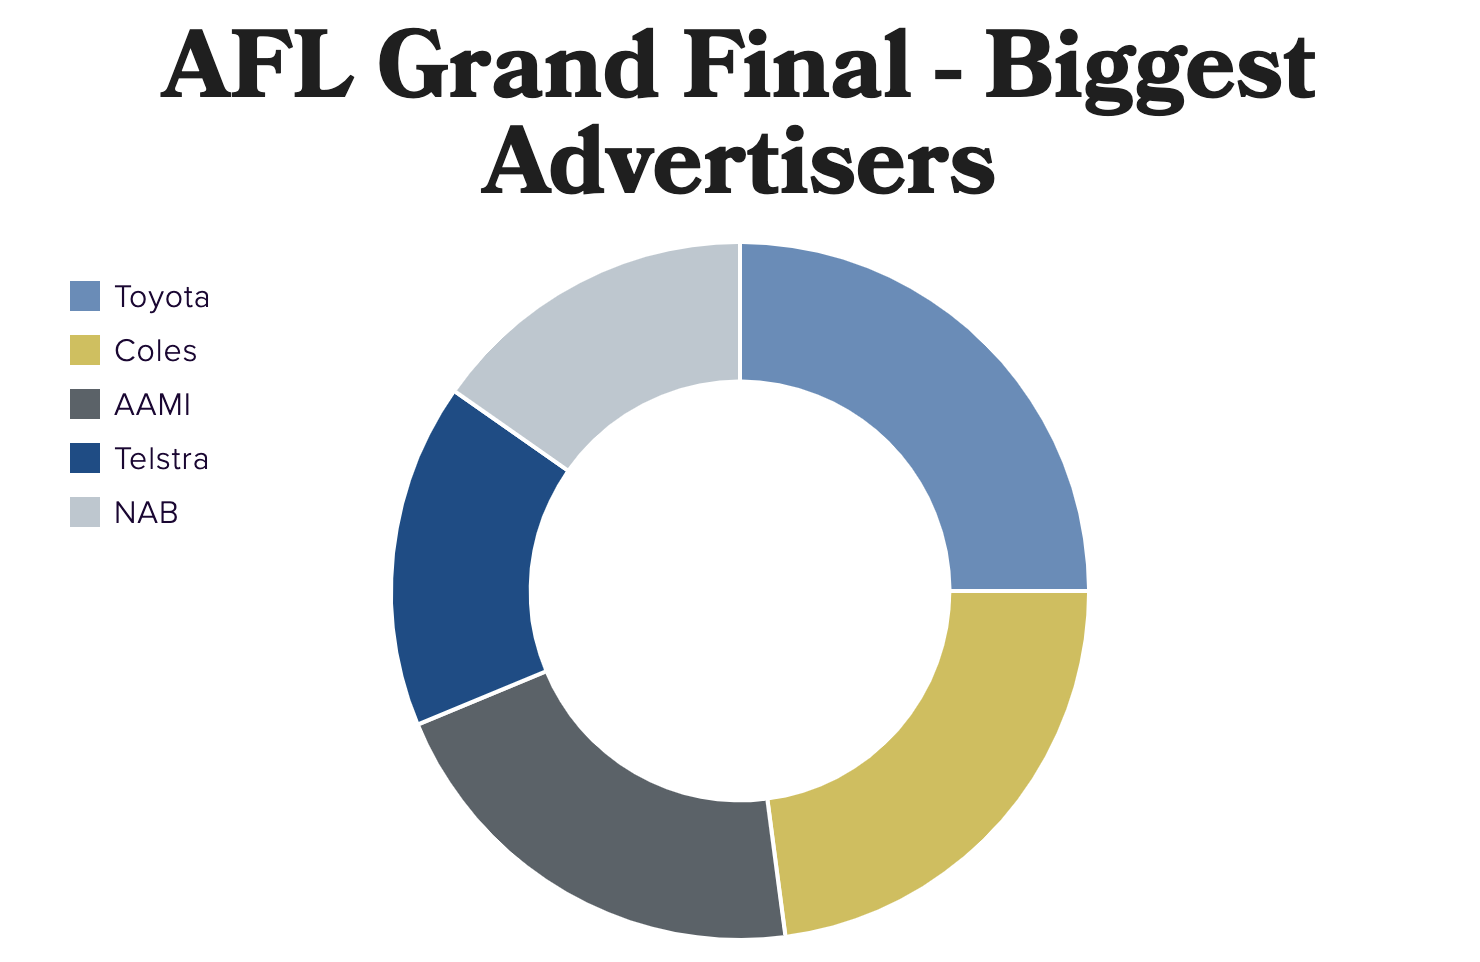 Most advertised brands during the AFL Grand Final (No. of TV ad spots)